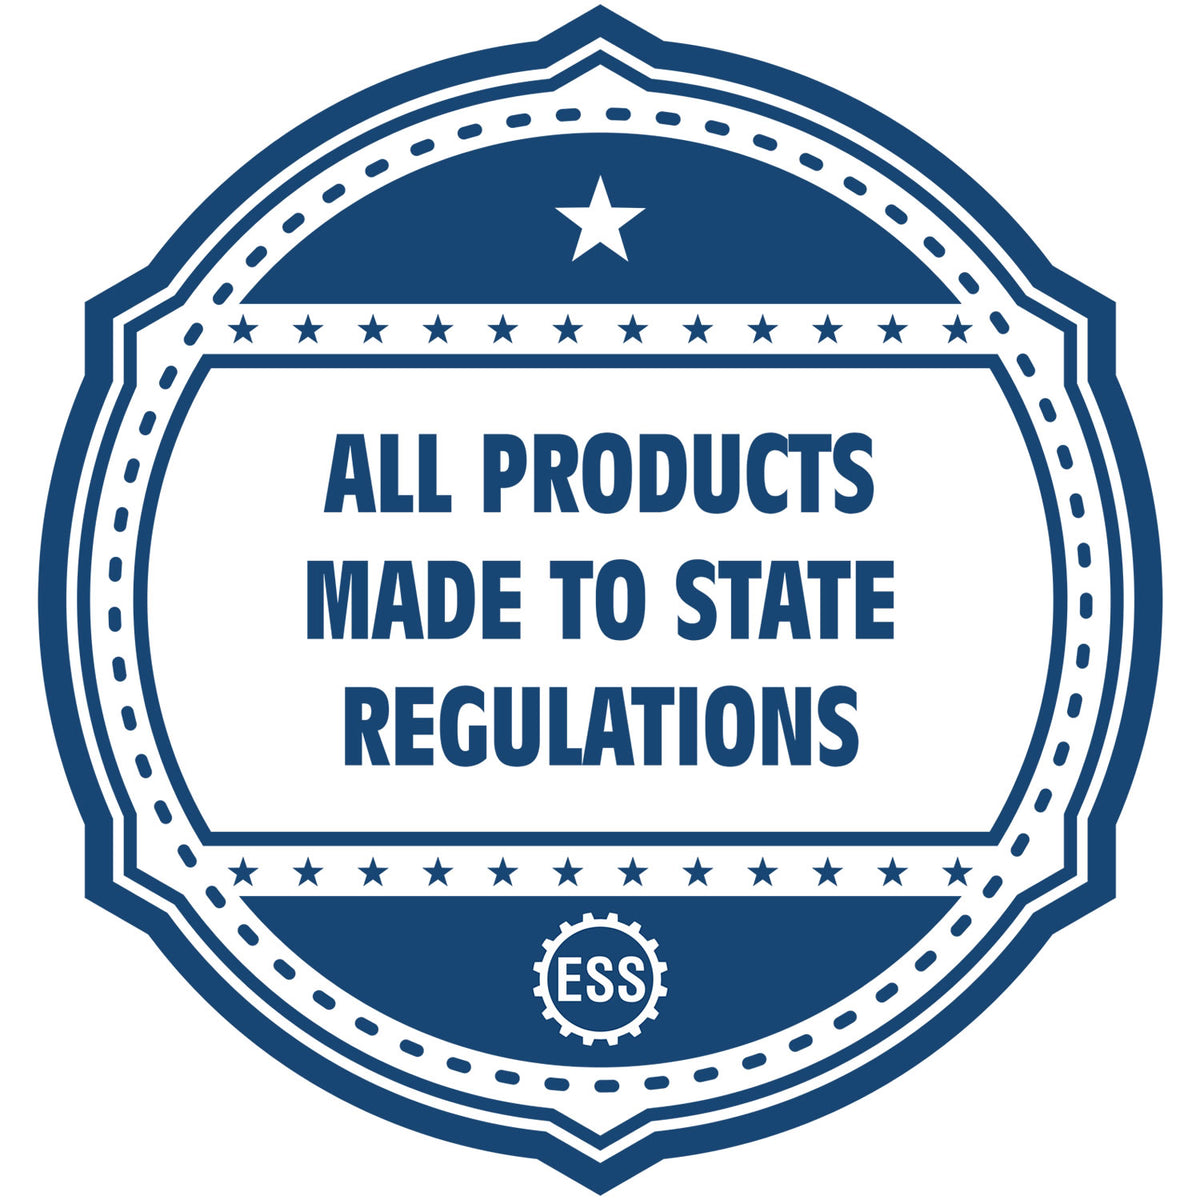 An icon or badge element for the Handheld New Mexico Professional Engineer Embosser showing that this product is made in compliance with state regulations.